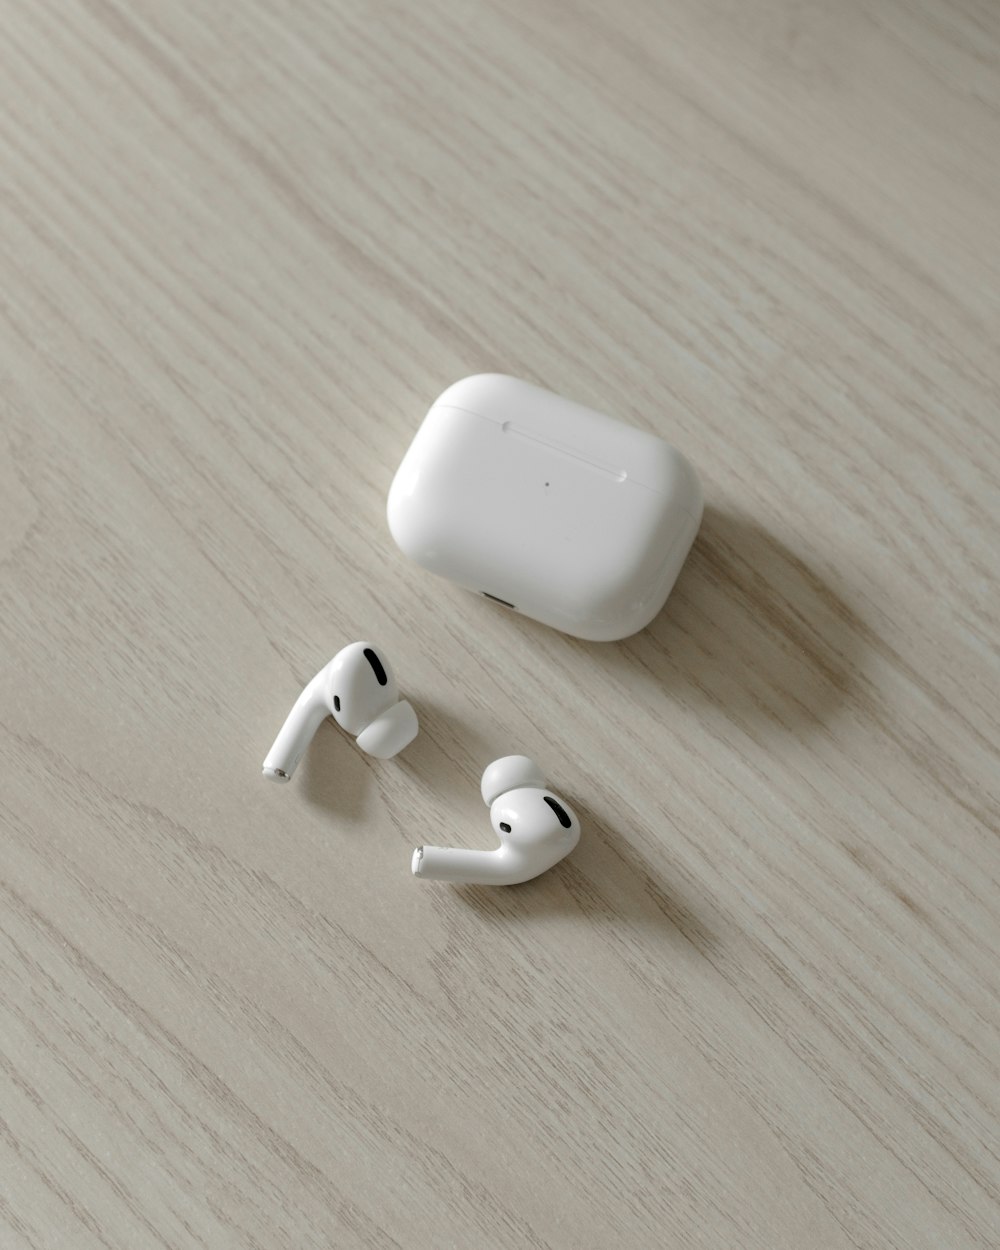 white apple airpods on brown wooden table photo – Free Image on Unsplash